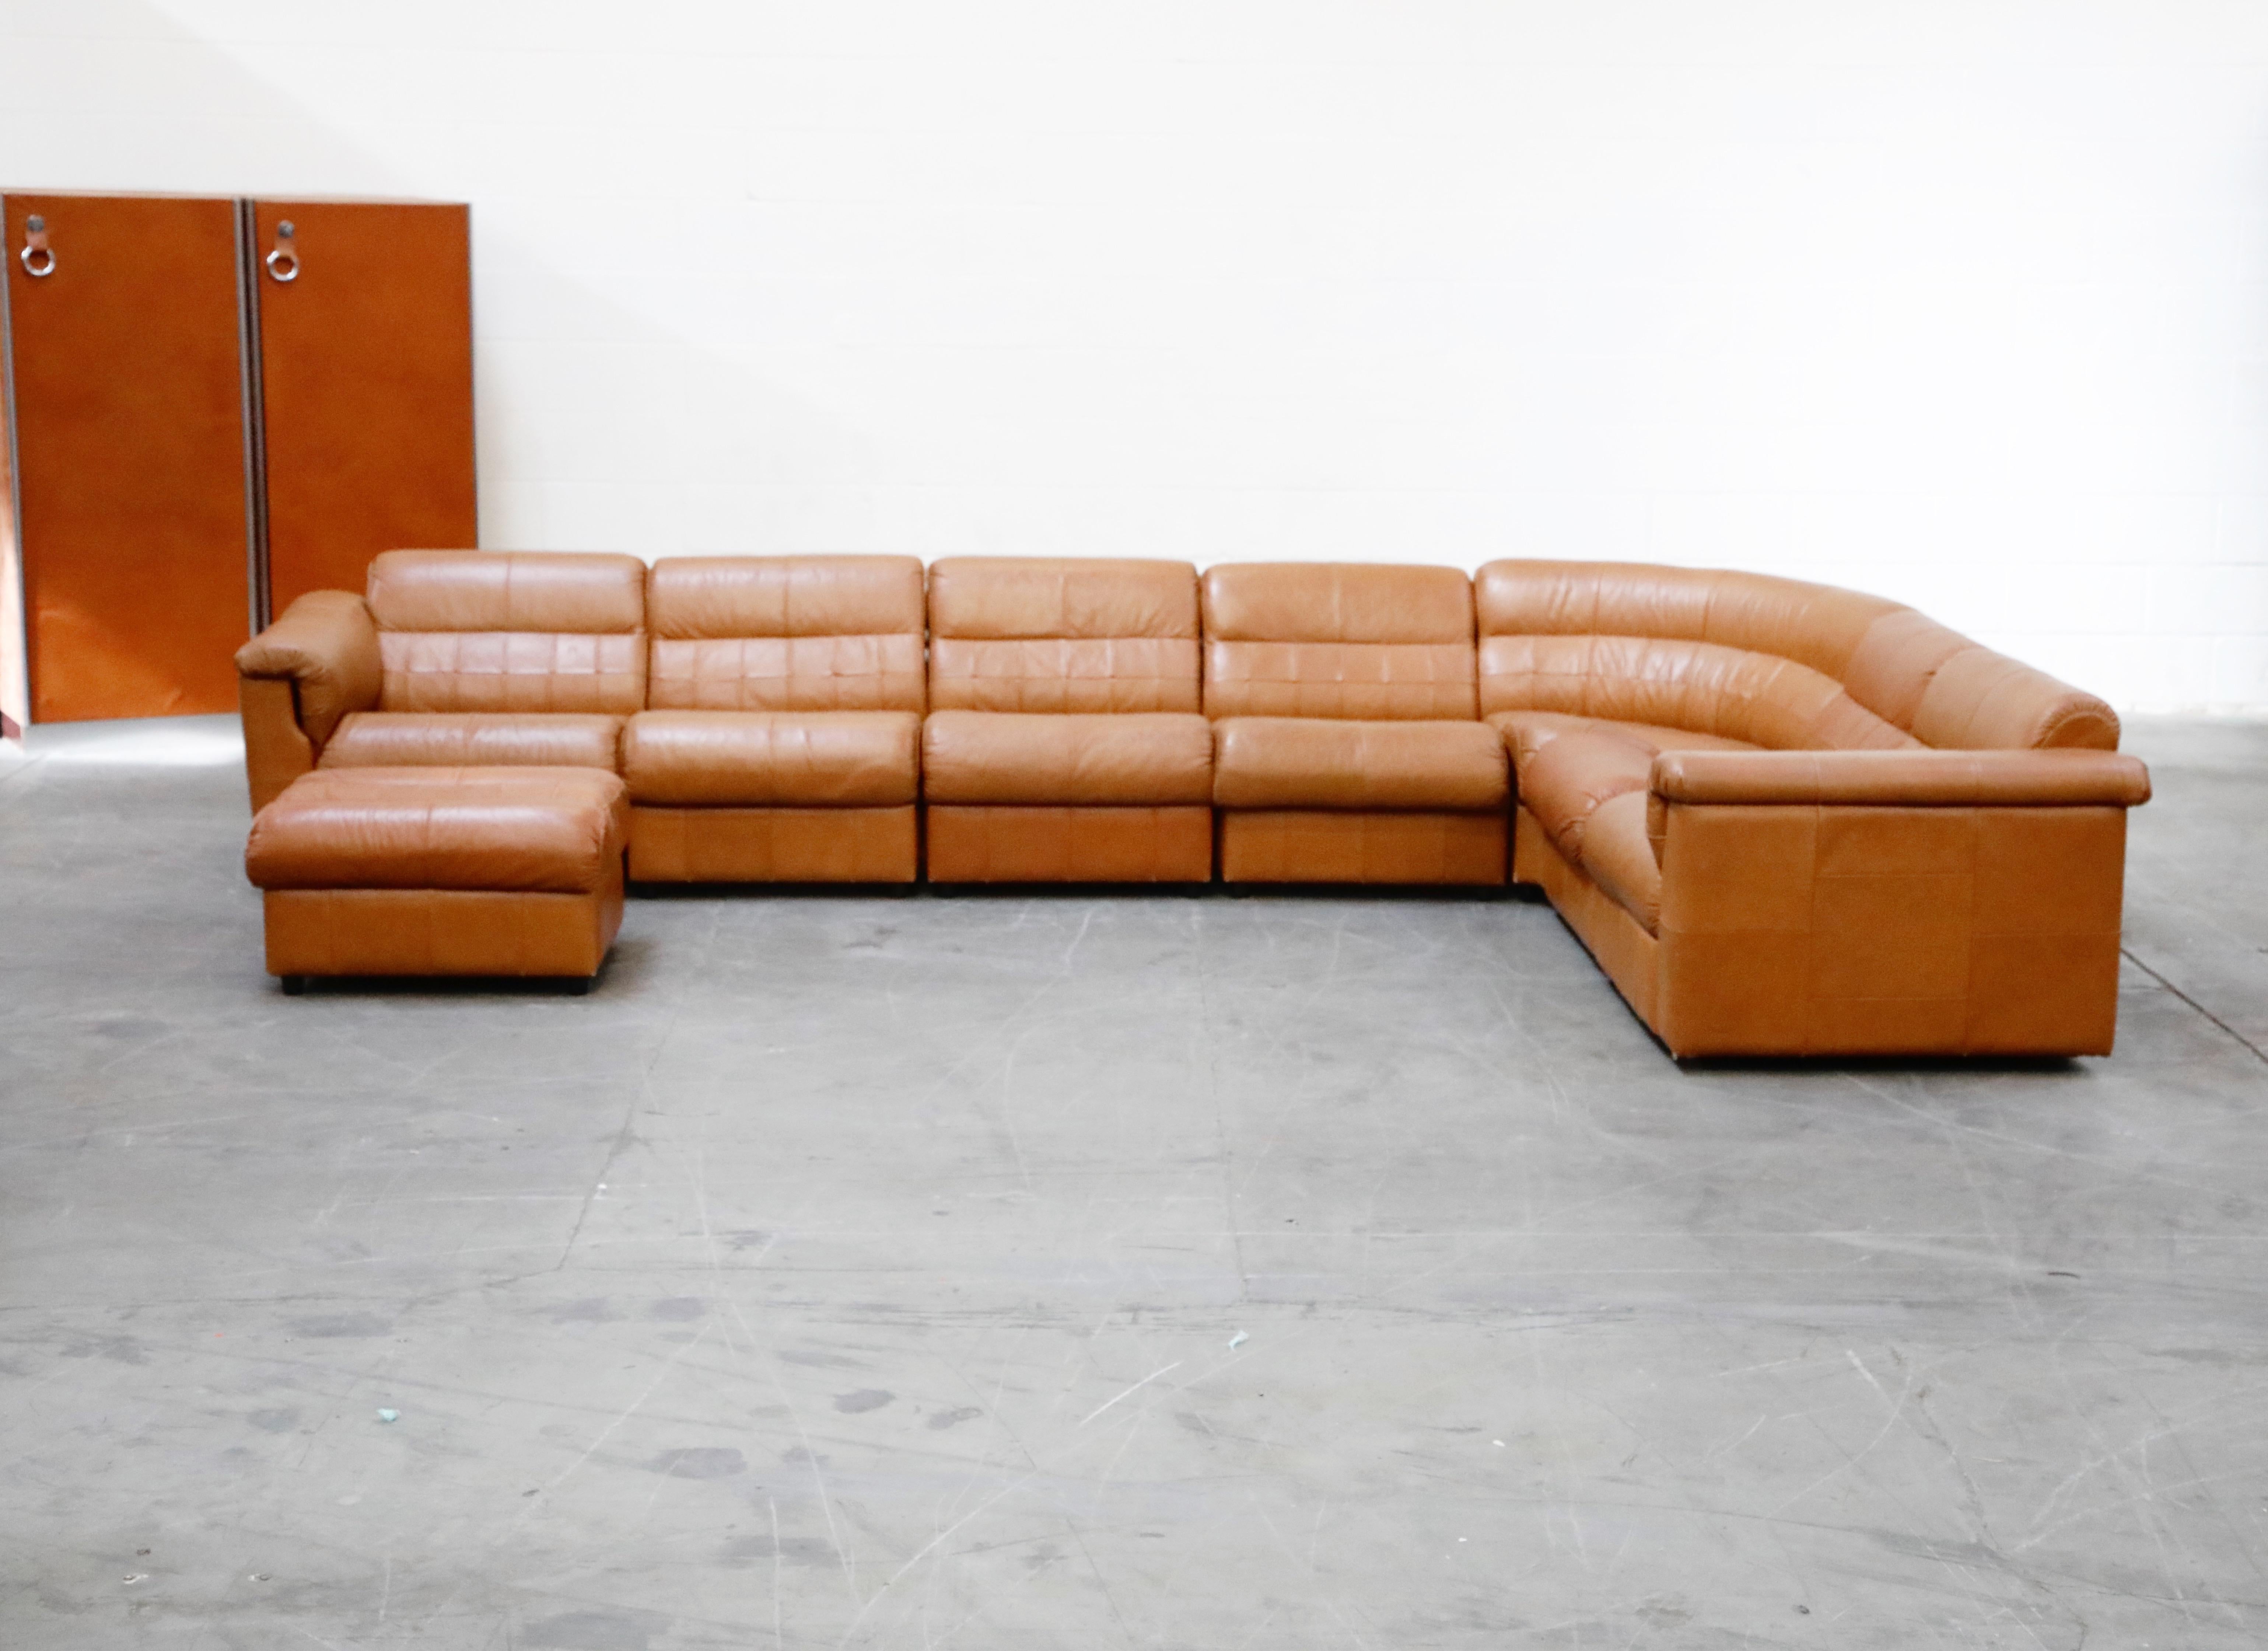 An impressive 1960s modular set of eight (8) sections of cognac brown patchwork leather sectional living room set by Brazilian Modern designer Percival Lafer, each section retains its original 'Lafer S.A.' / 'Made In Brazil' labels underneath. This